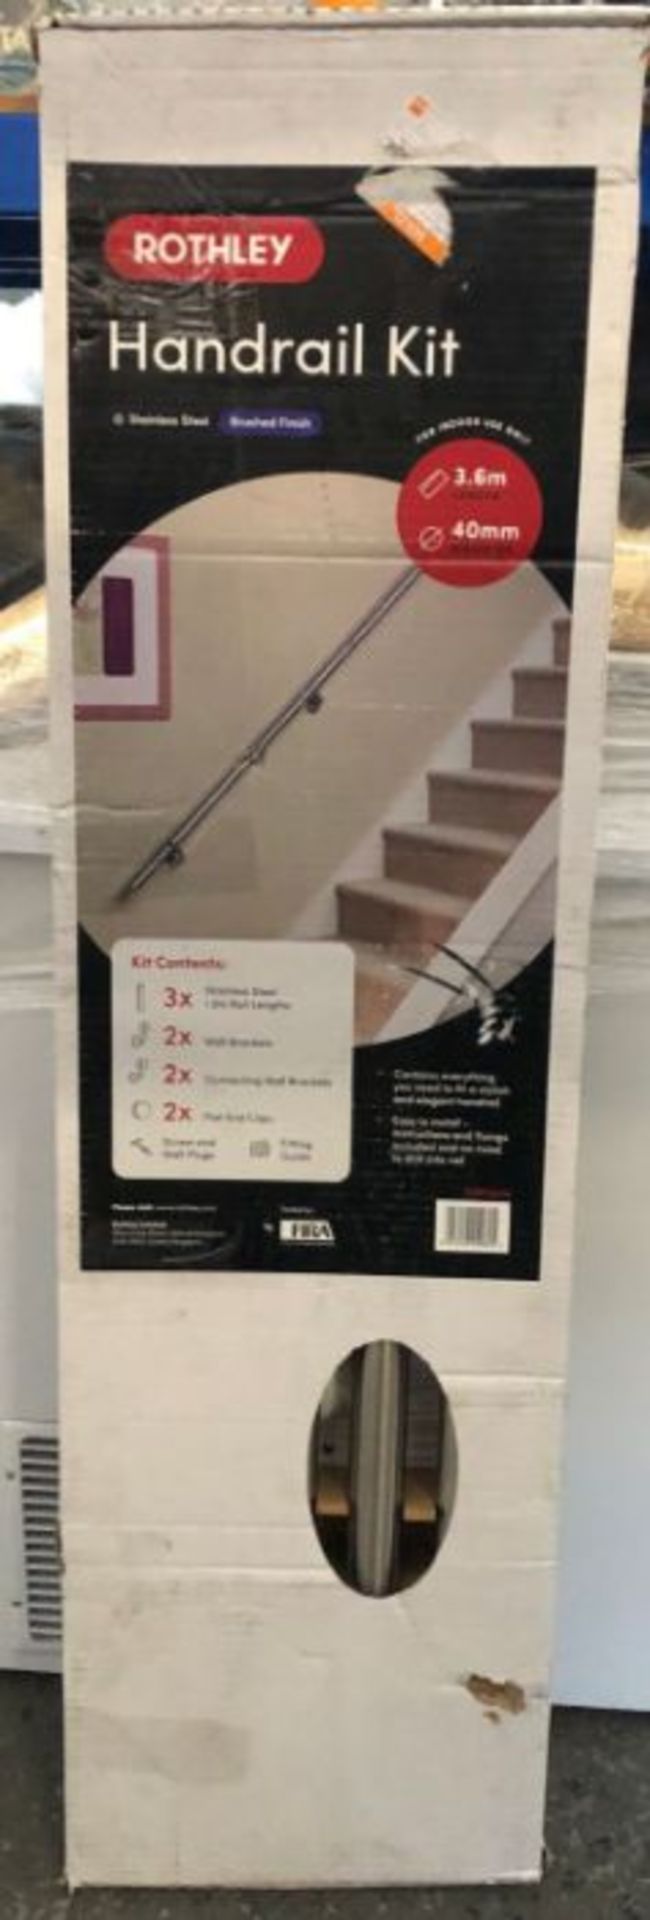 1 X MODERN BRUSHED STAINLESS STEEL ROUNDED HANDRAIL KIT, (L)3.6M, (W)40MM / RRP £65.00 / CUSTOMER